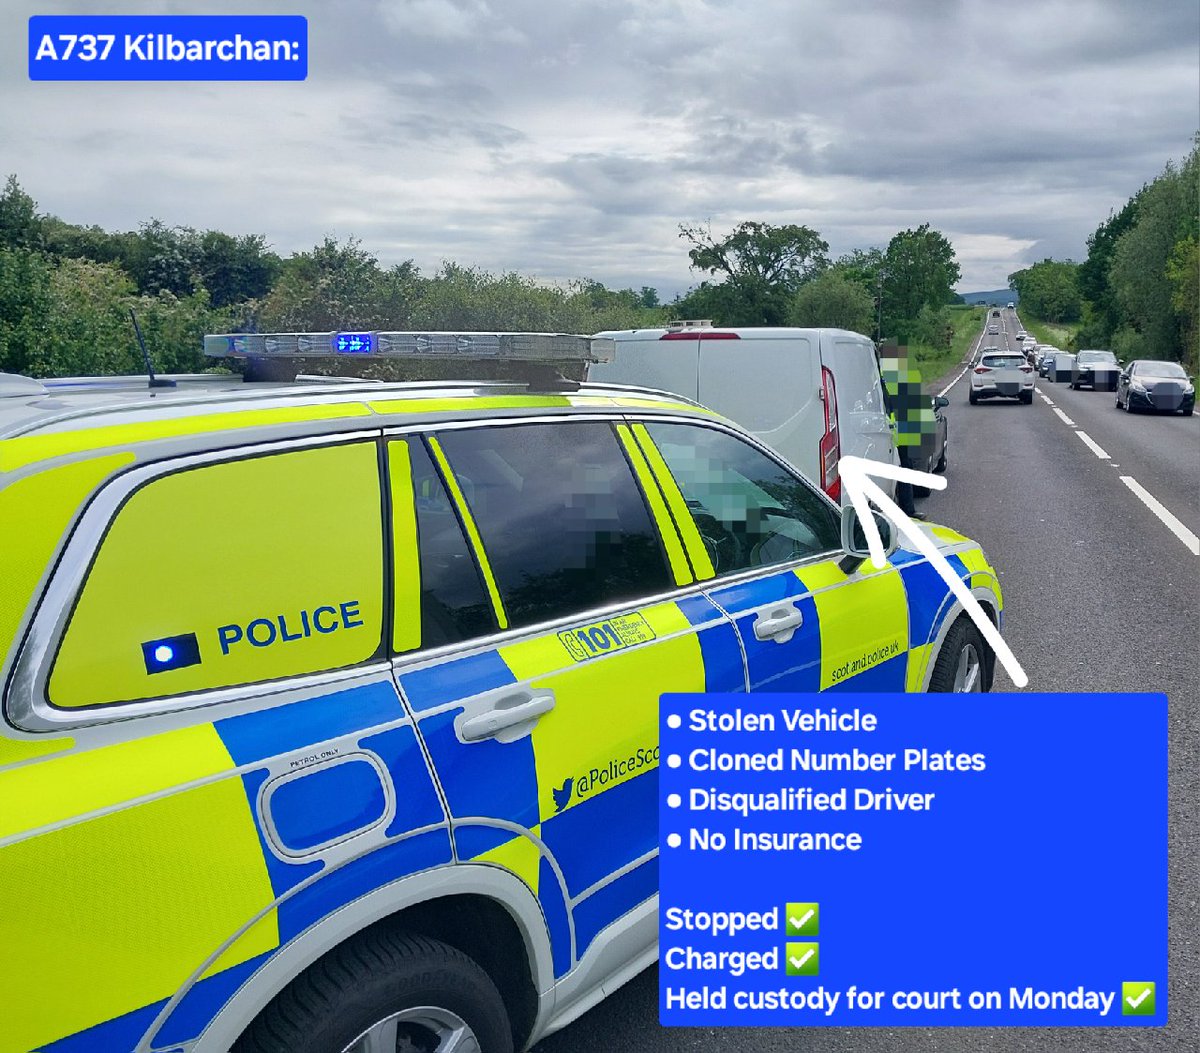 #GlasgowRP were aware that this stolen van was being driven across the region on 'cloned' plates. We spotted it earlier today on the #A737 where we safely stopped the vehicle  using tactics to avoid a pursuit and arrested the driver

⬇️Details Below⬇️

#RoomWithNoView
#DontRiskIt